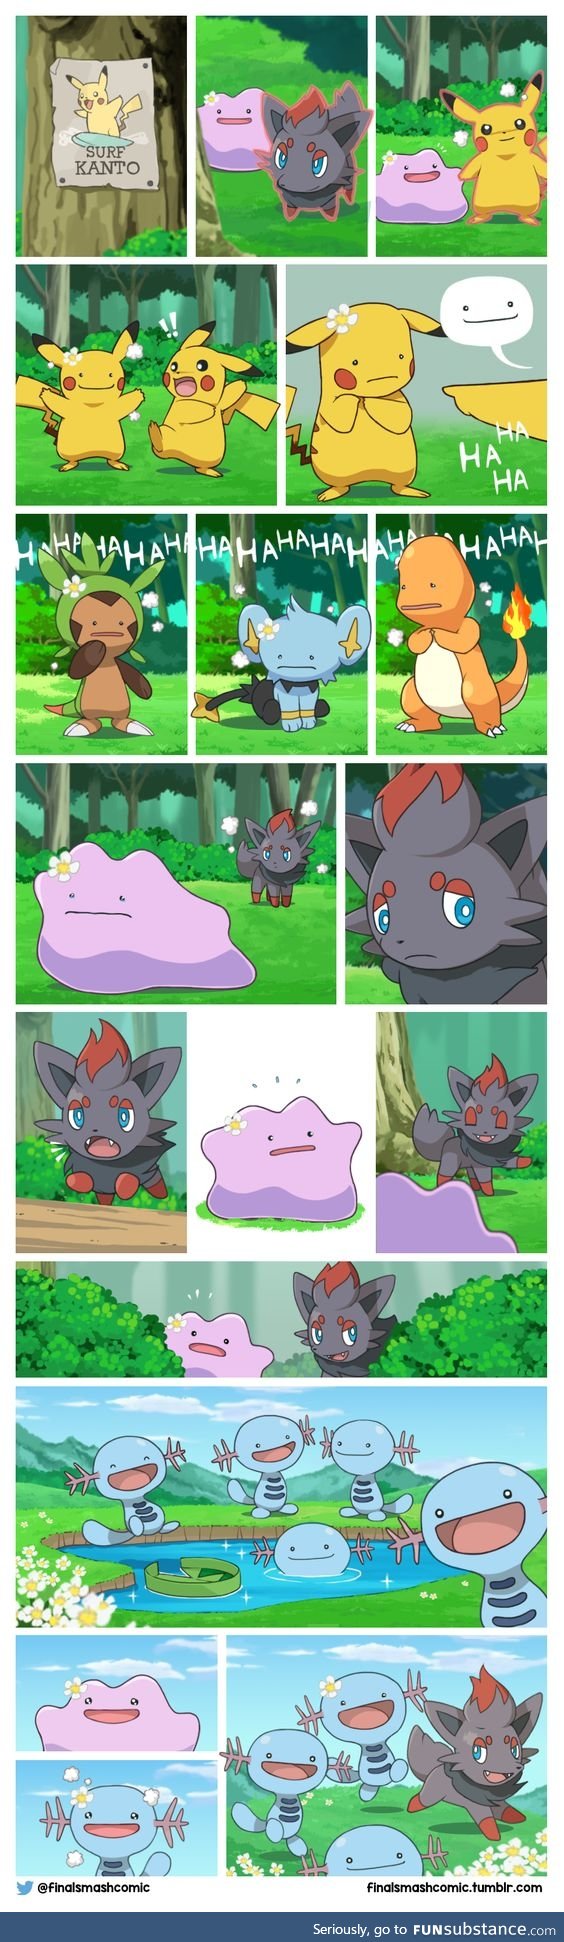 Ditto is best pokemon don't @ me